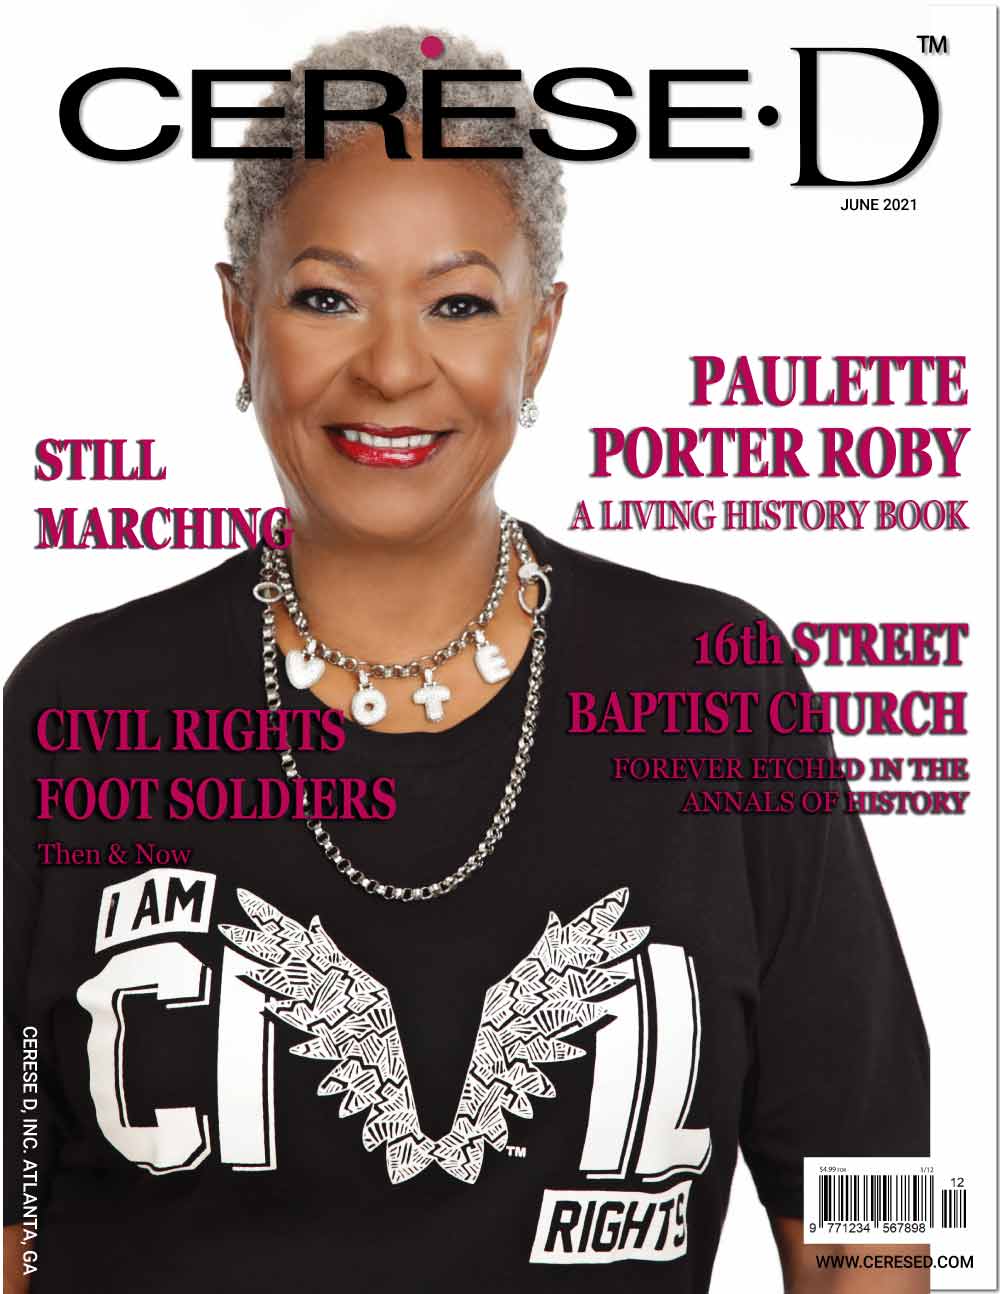 June 2021 Cerese D Magazine cover featuring Paulette Roby